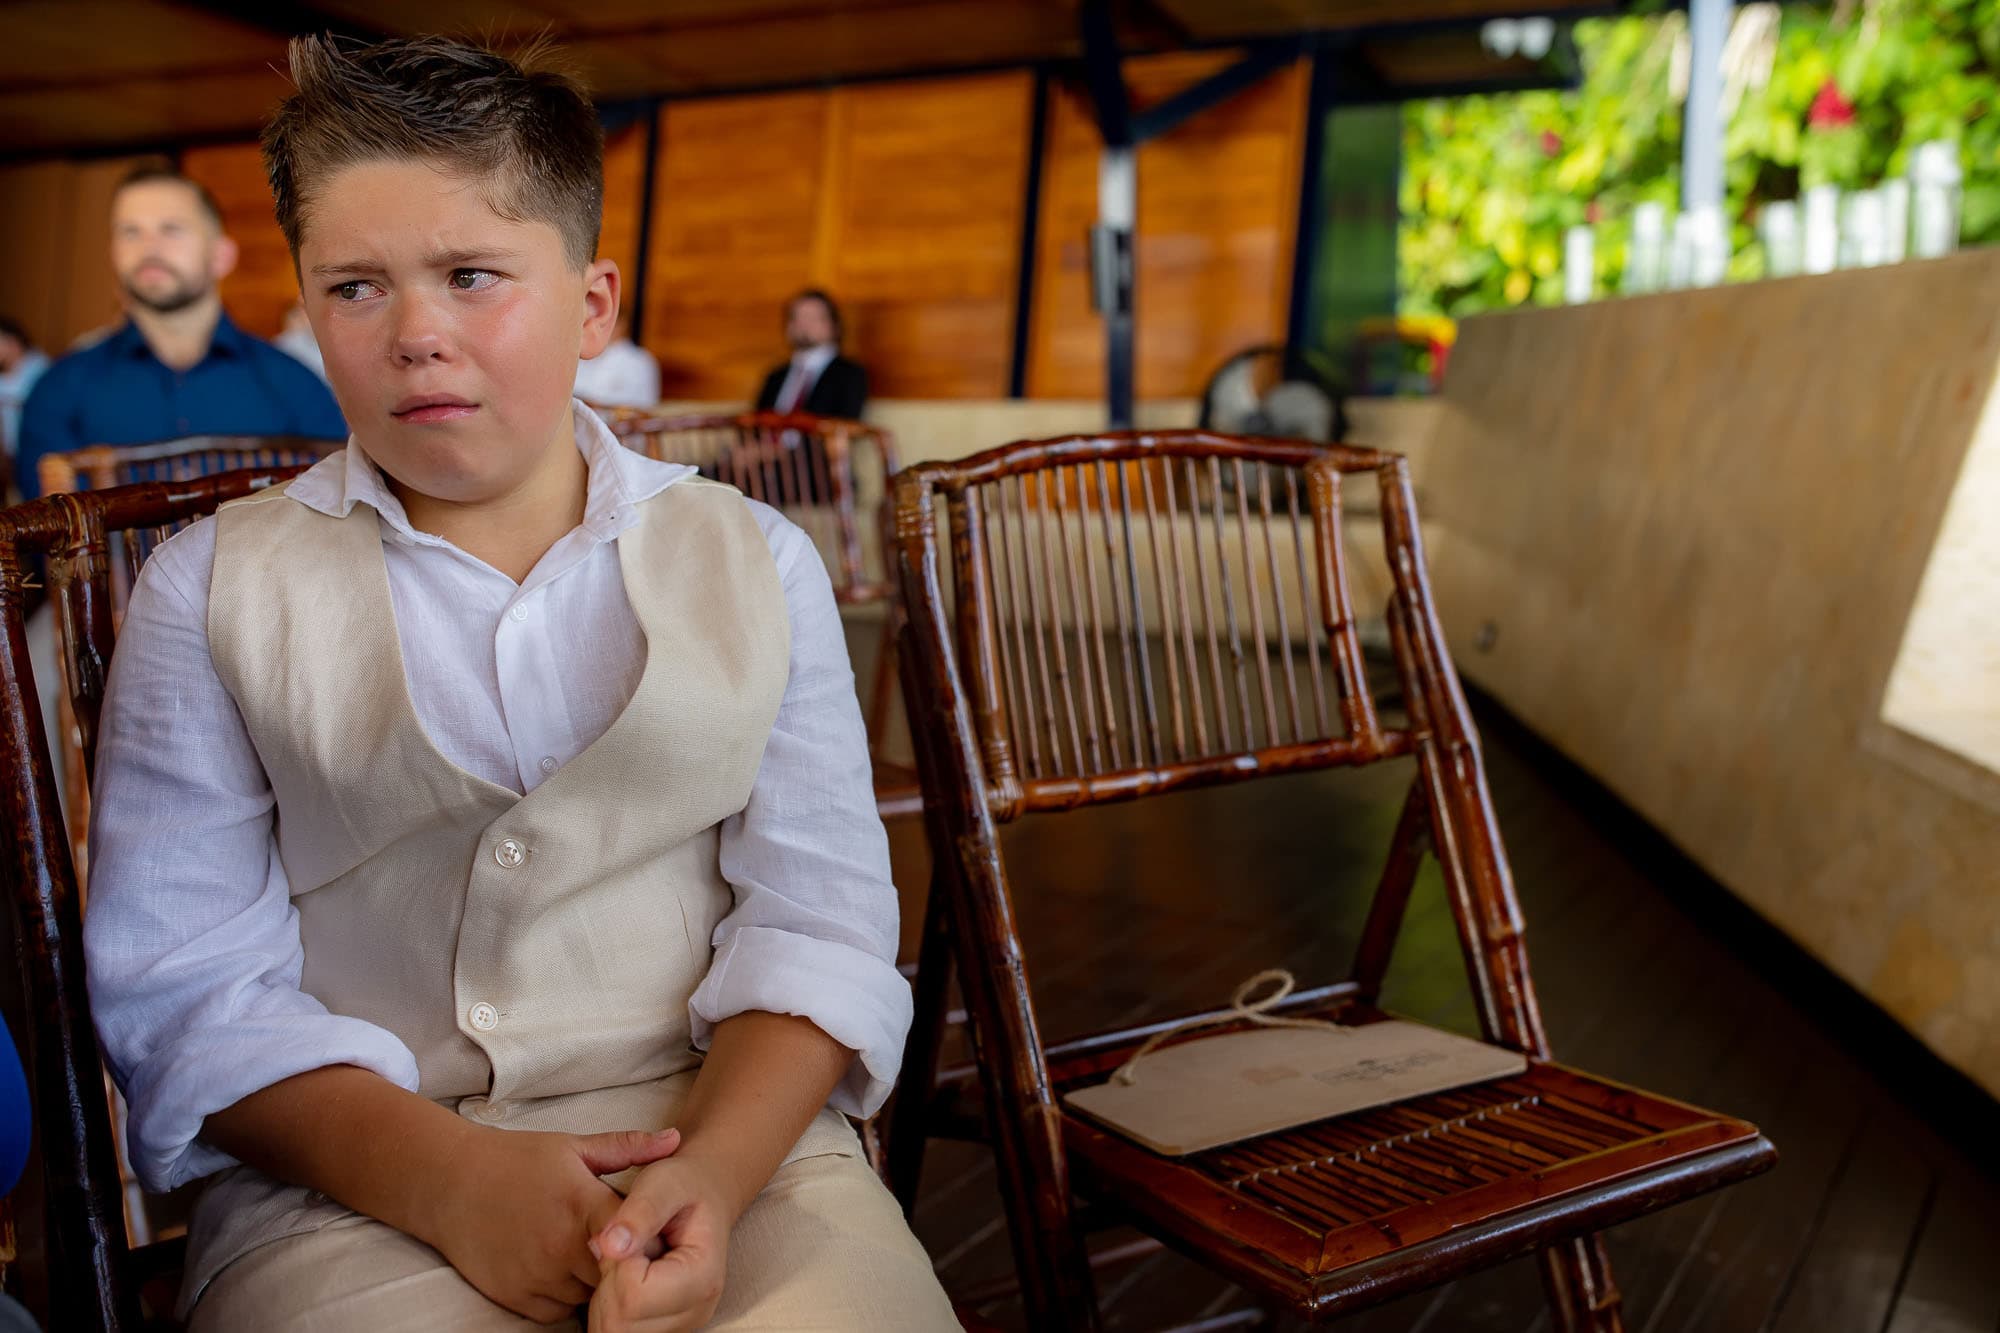 Bride's son tearing up during the ceremony